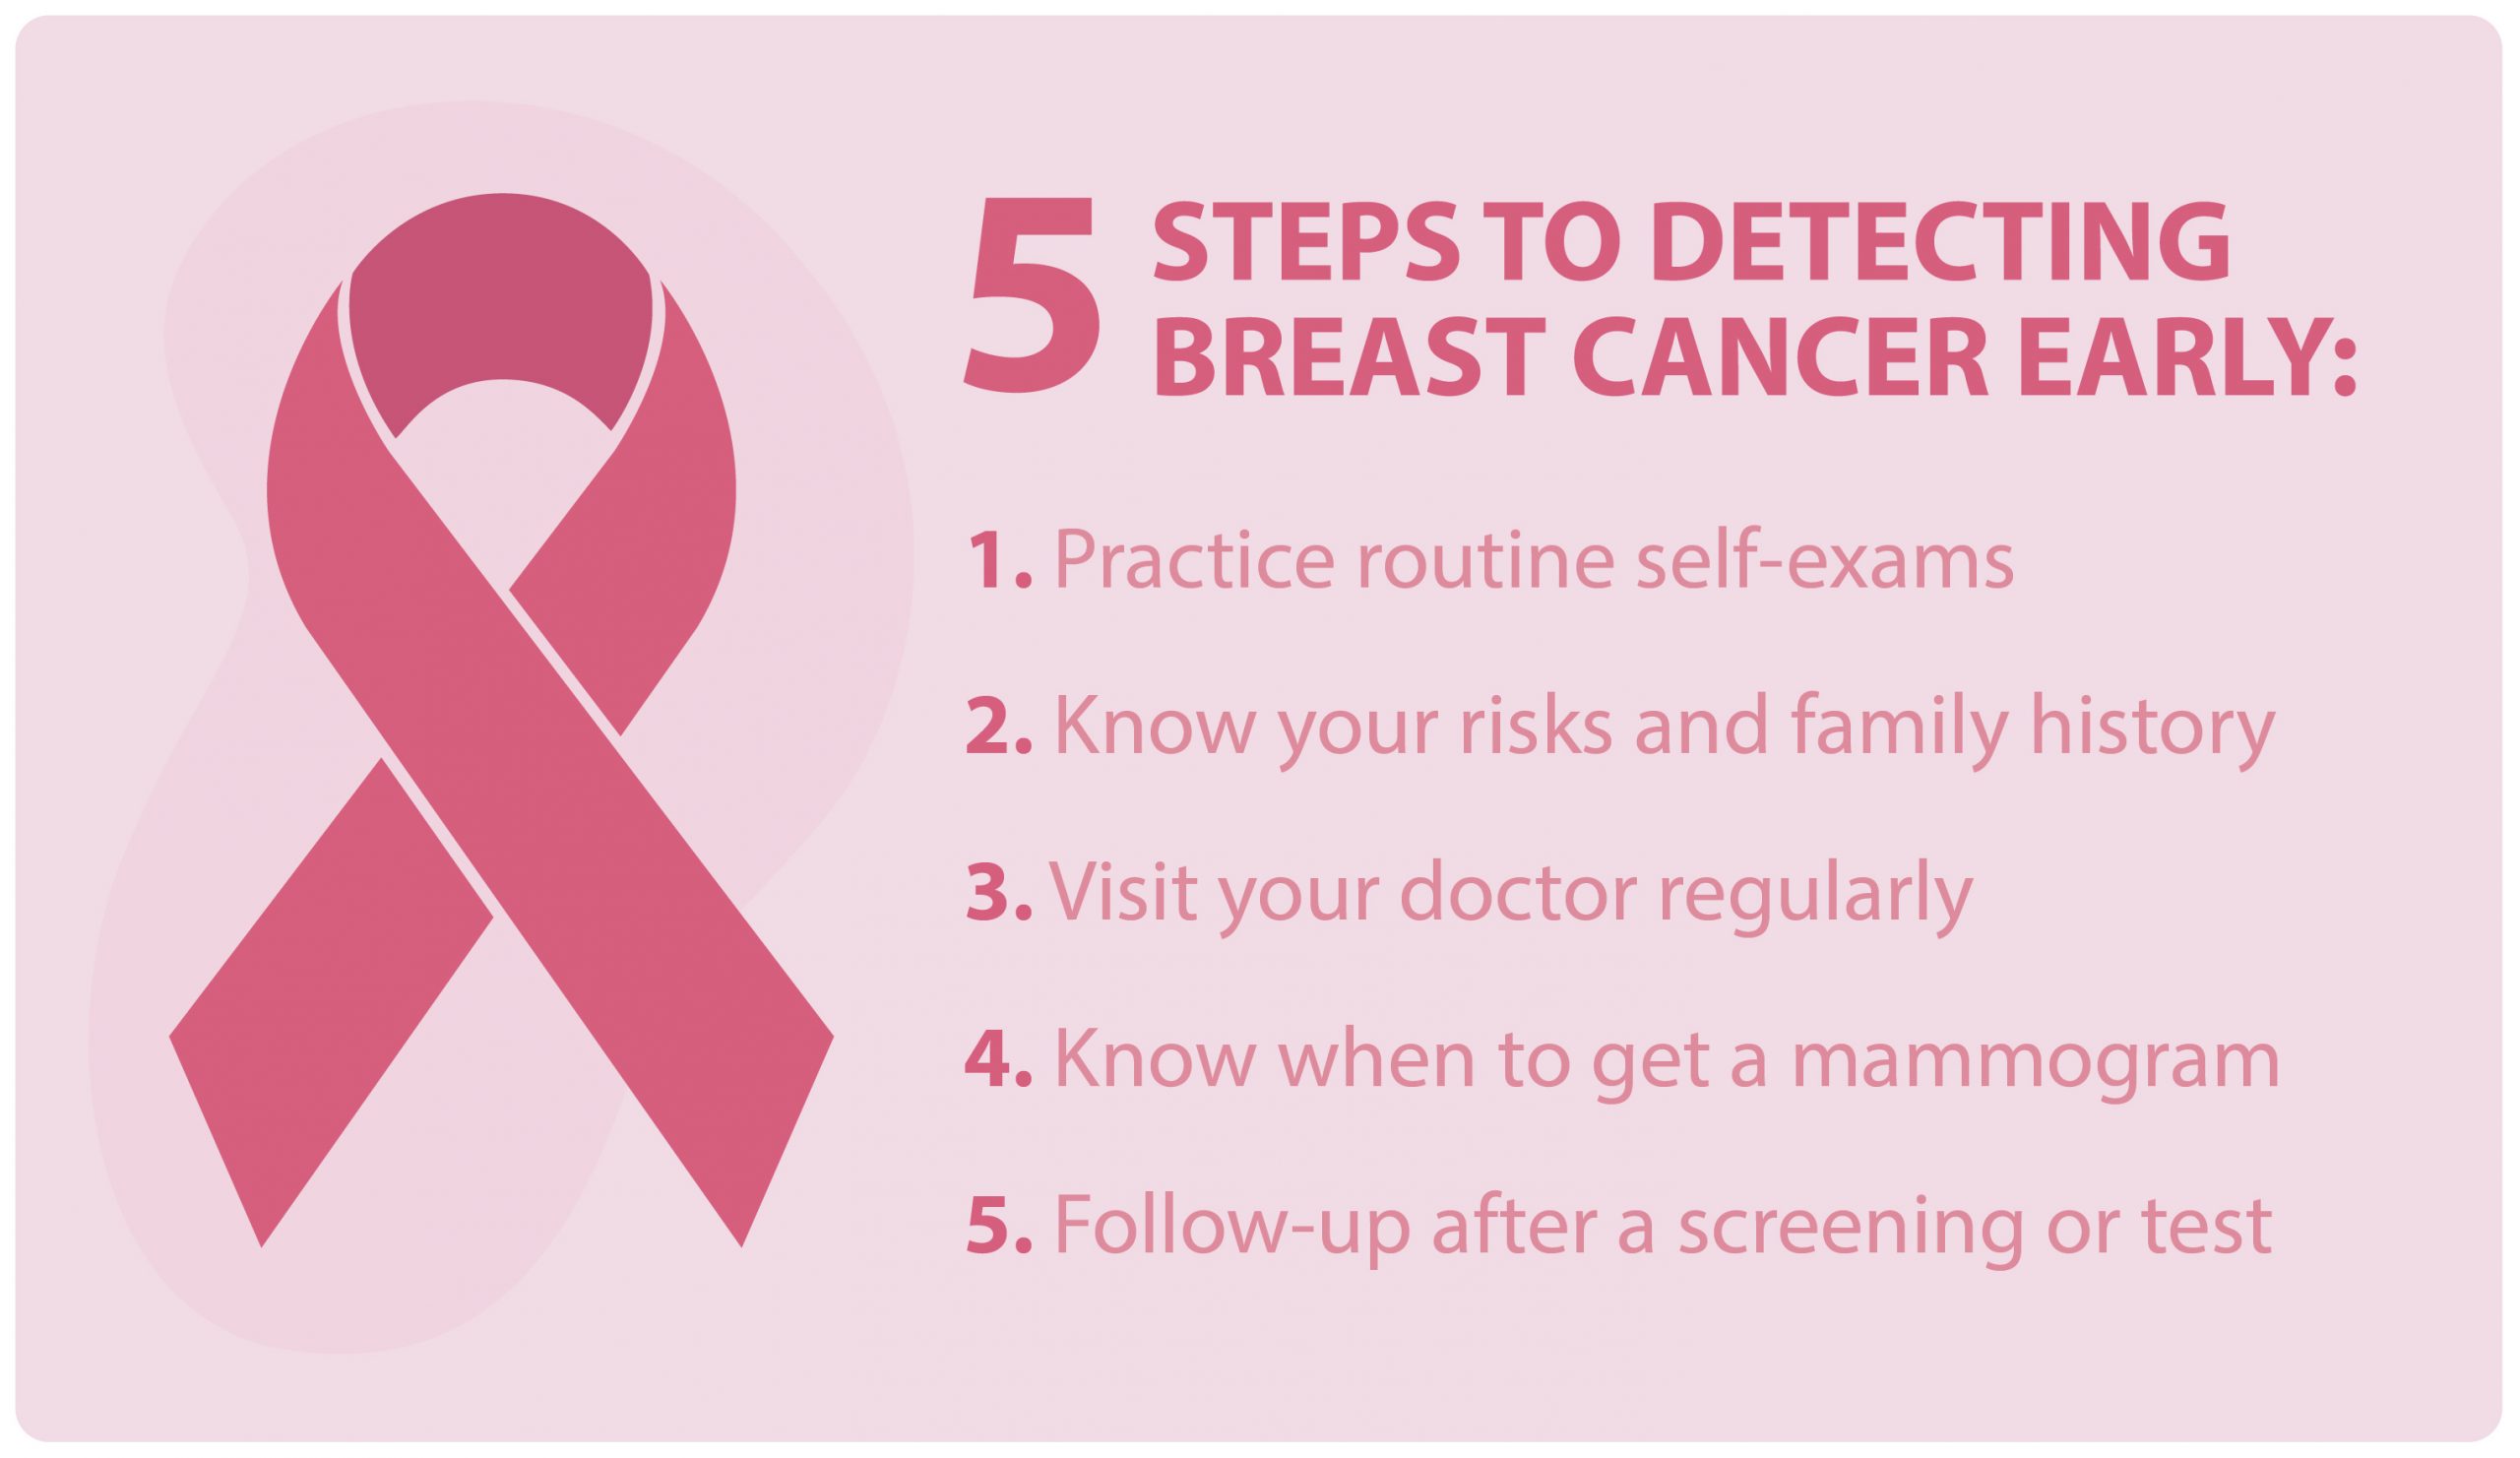 5 Steps to Detecting Breast Cancer Early